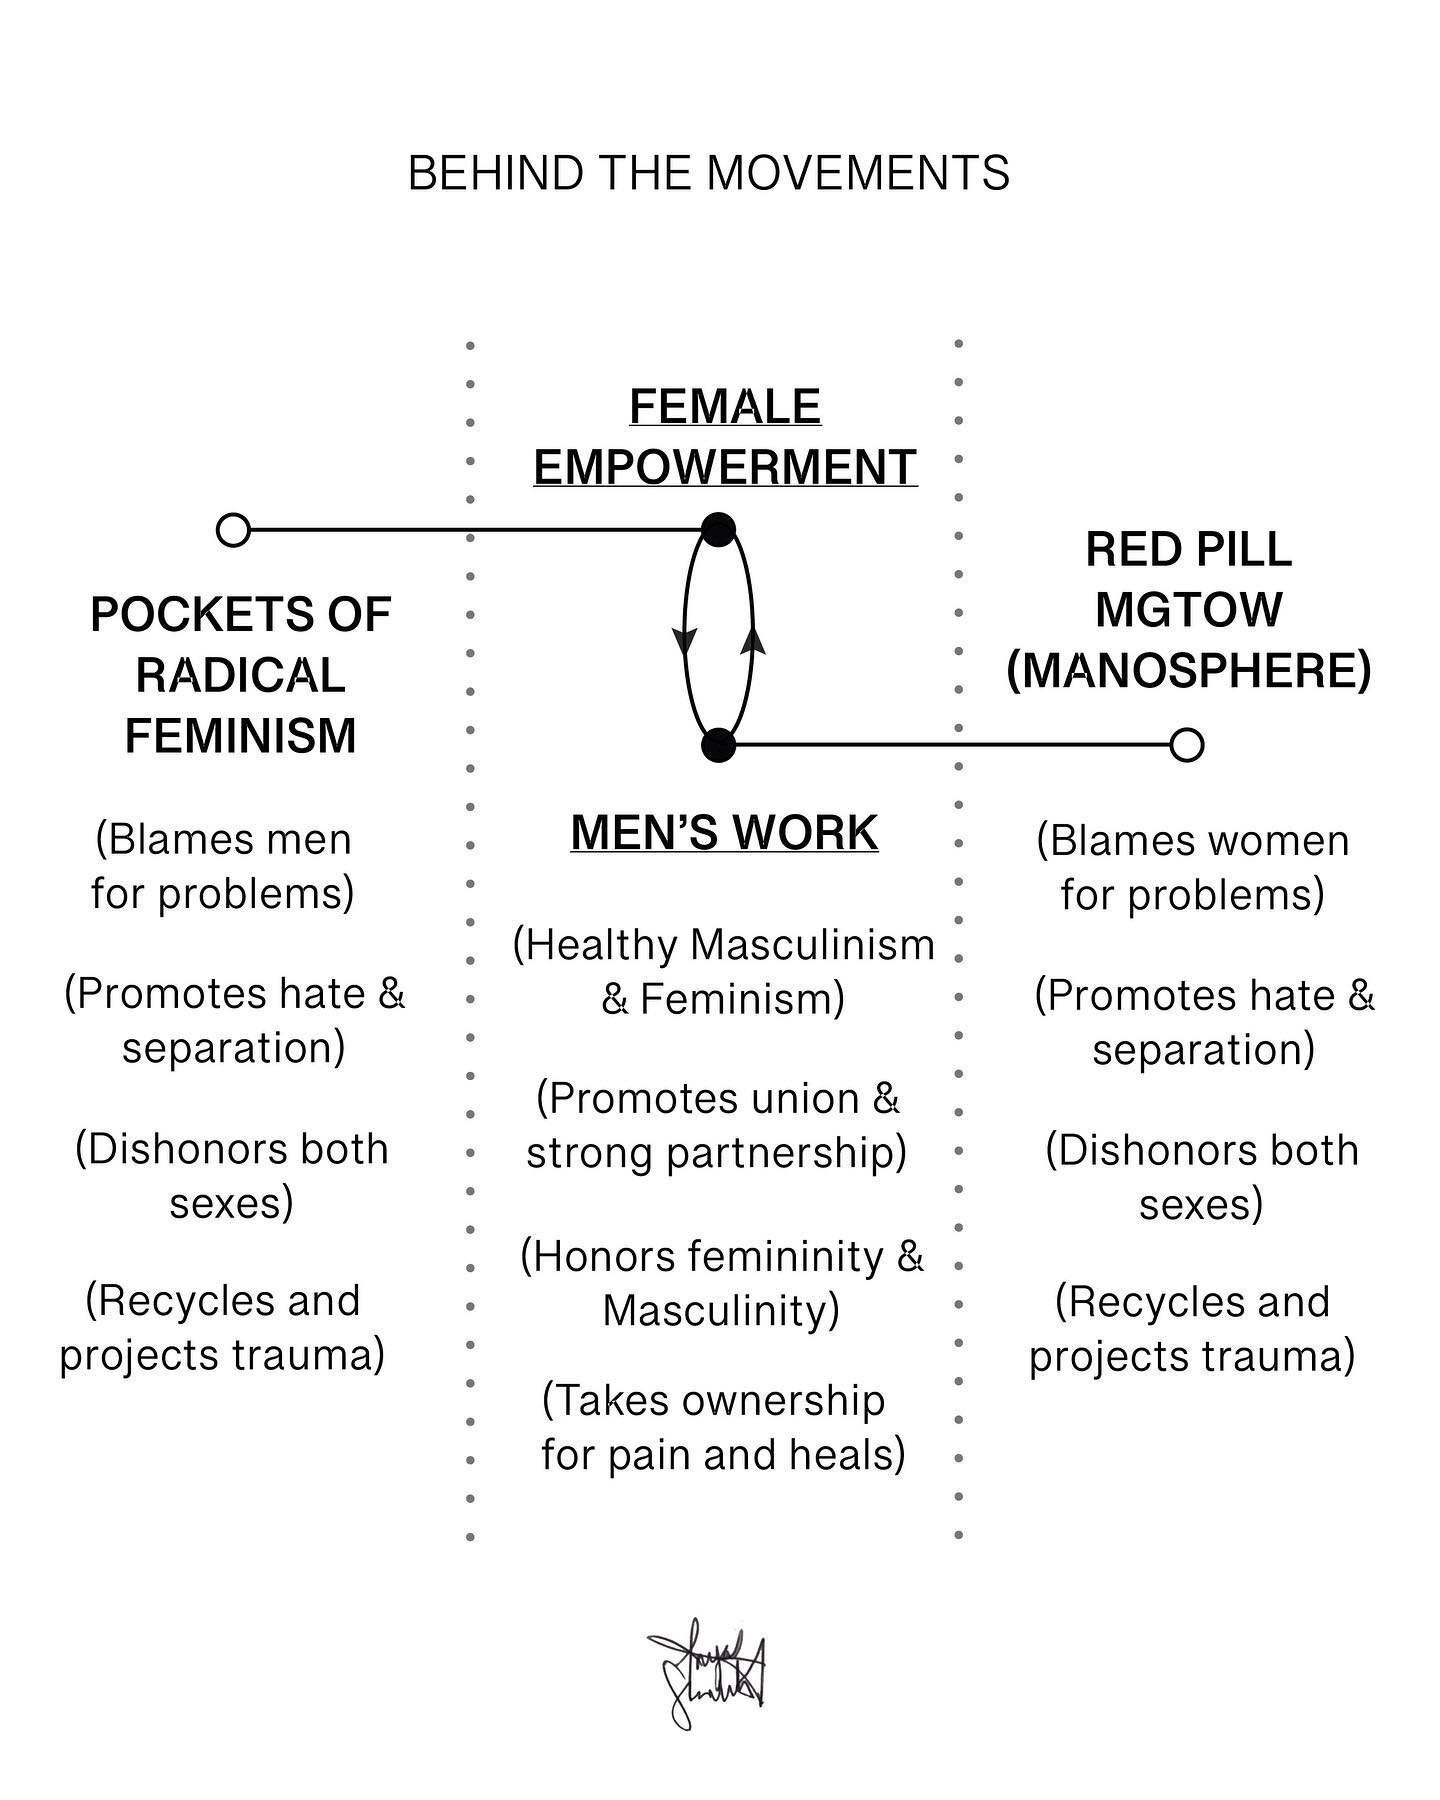 Female empowerment gets confused with radical feminism a lot.

Men&rsquo;s work gets confused with radical groups like Red Pill a lot.

True female empowerment is the liberation of womanhood as equal in value to manhood (not the same in its expressio